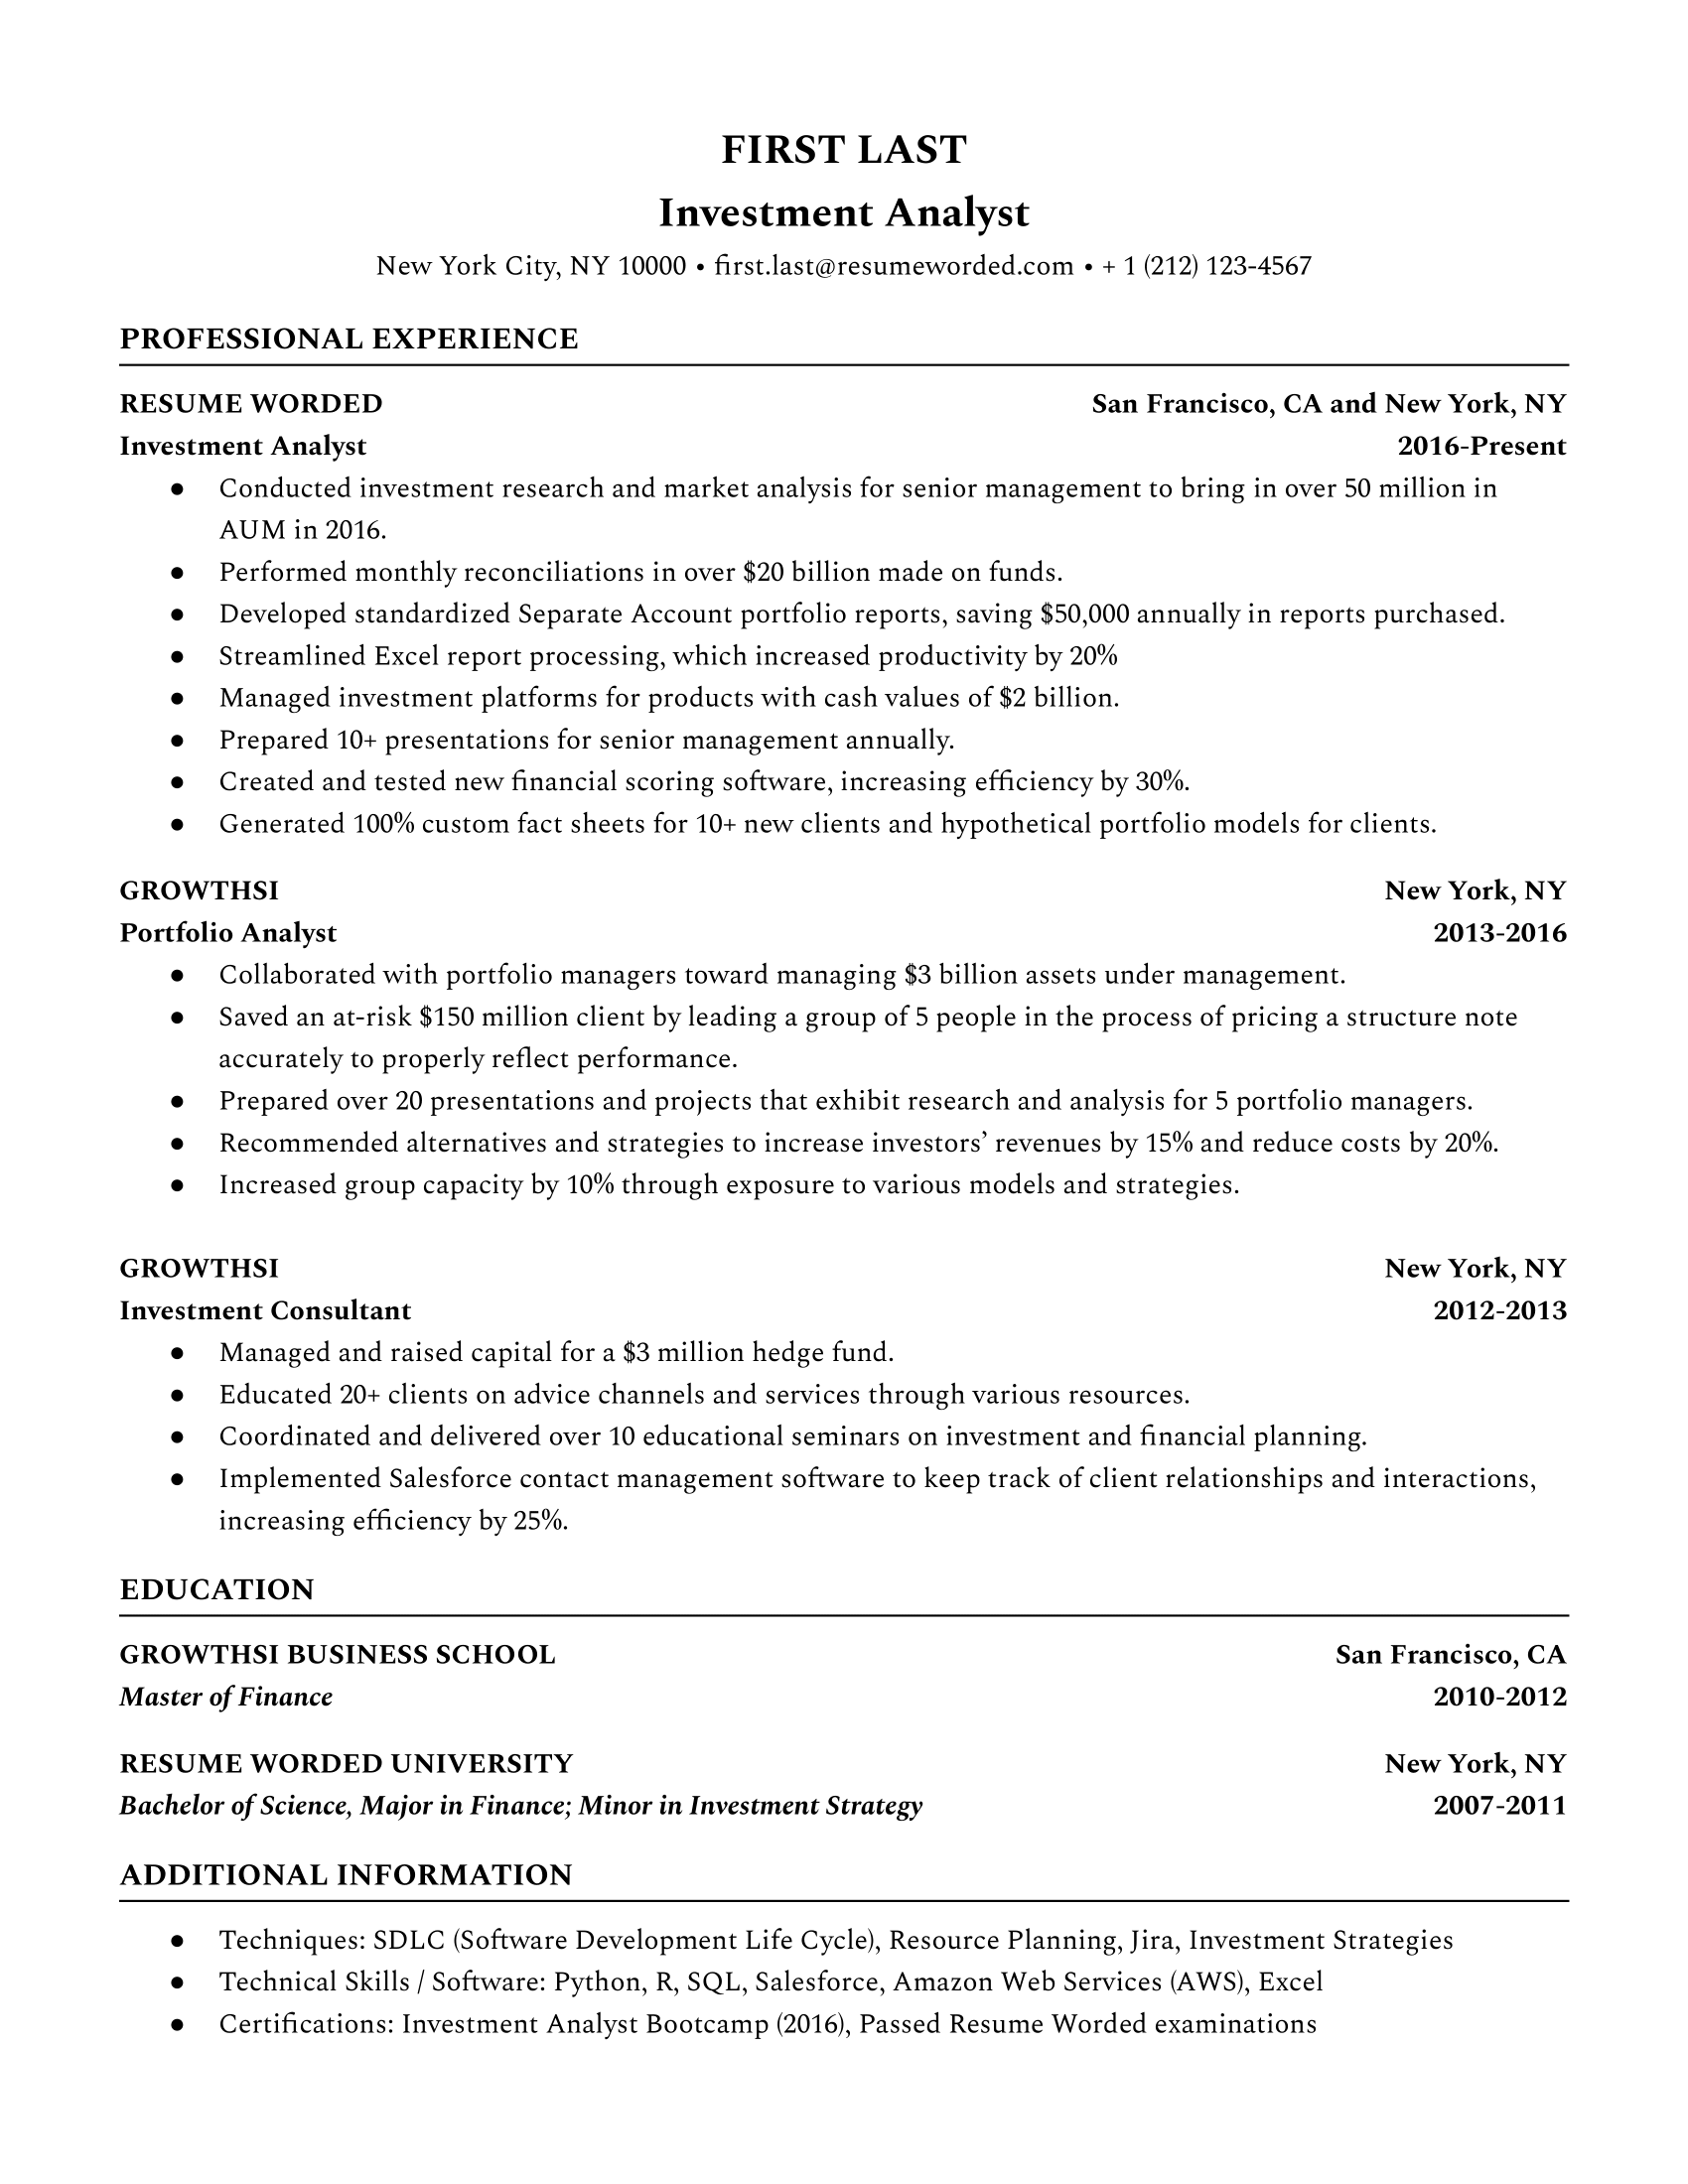 A well-structured Investment Analyst CV featuring both financial expertise and understanding of financial technologies.